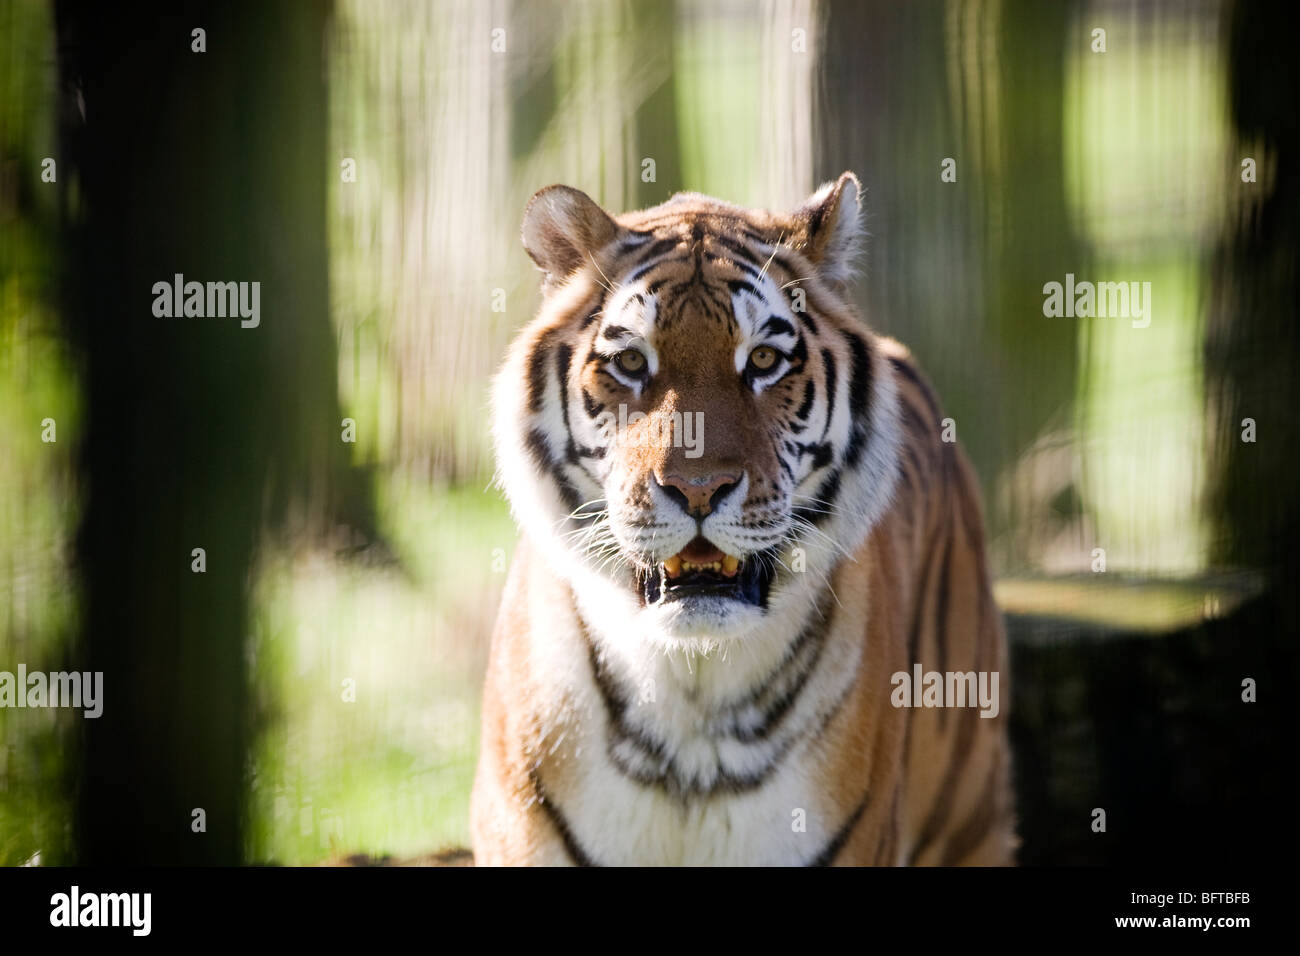 A male Tiger, an endangered species, at Whipsnade Zoo in the UK Stock Photo